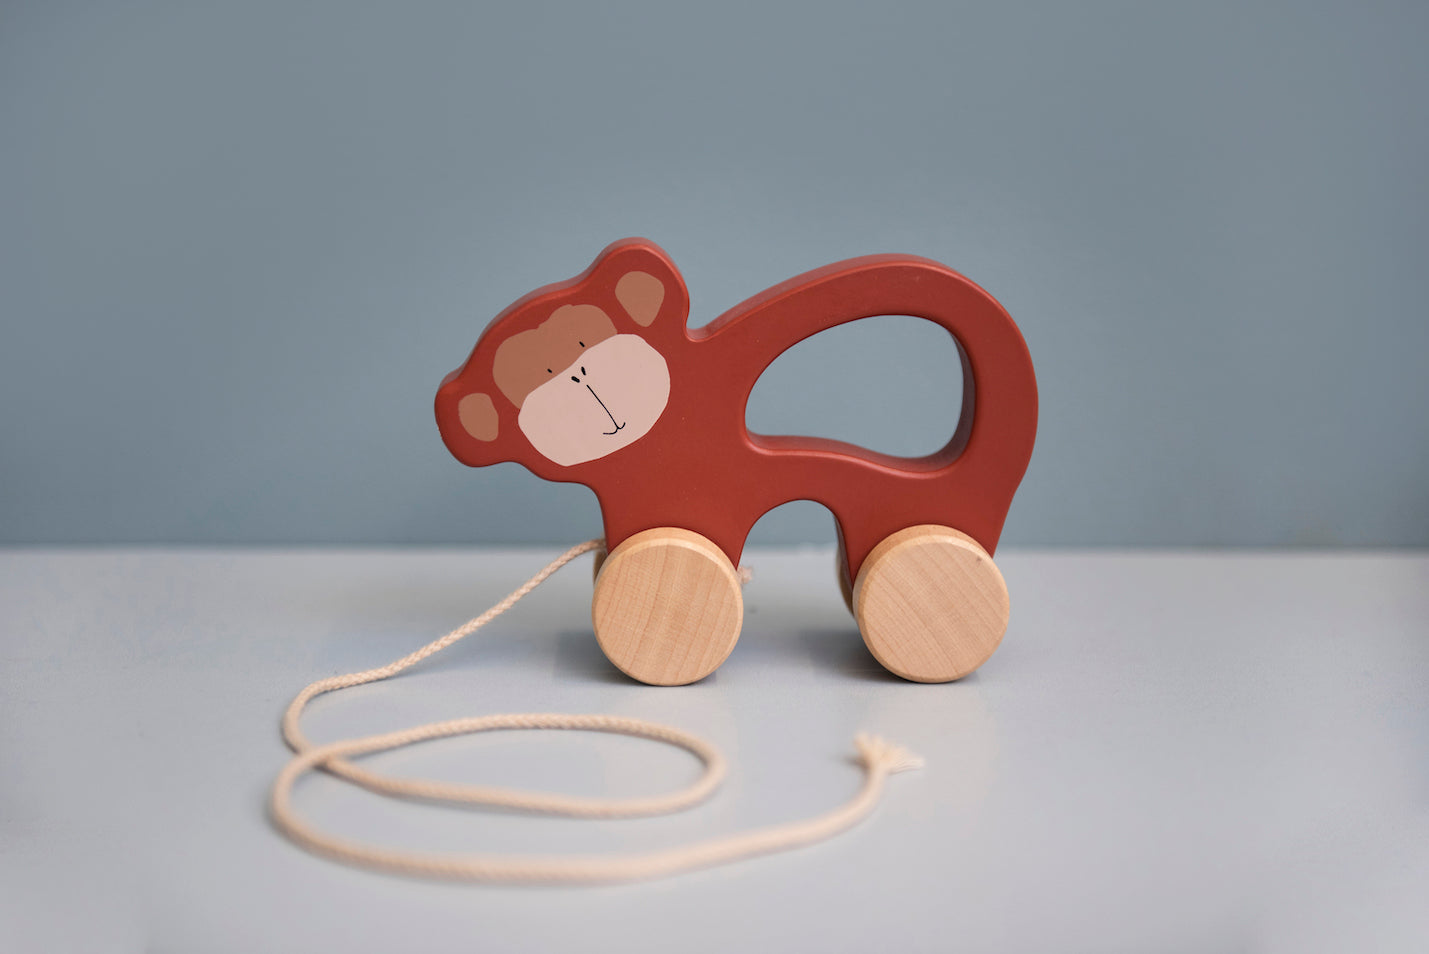 Wooden Pull Along Toy / Monkey